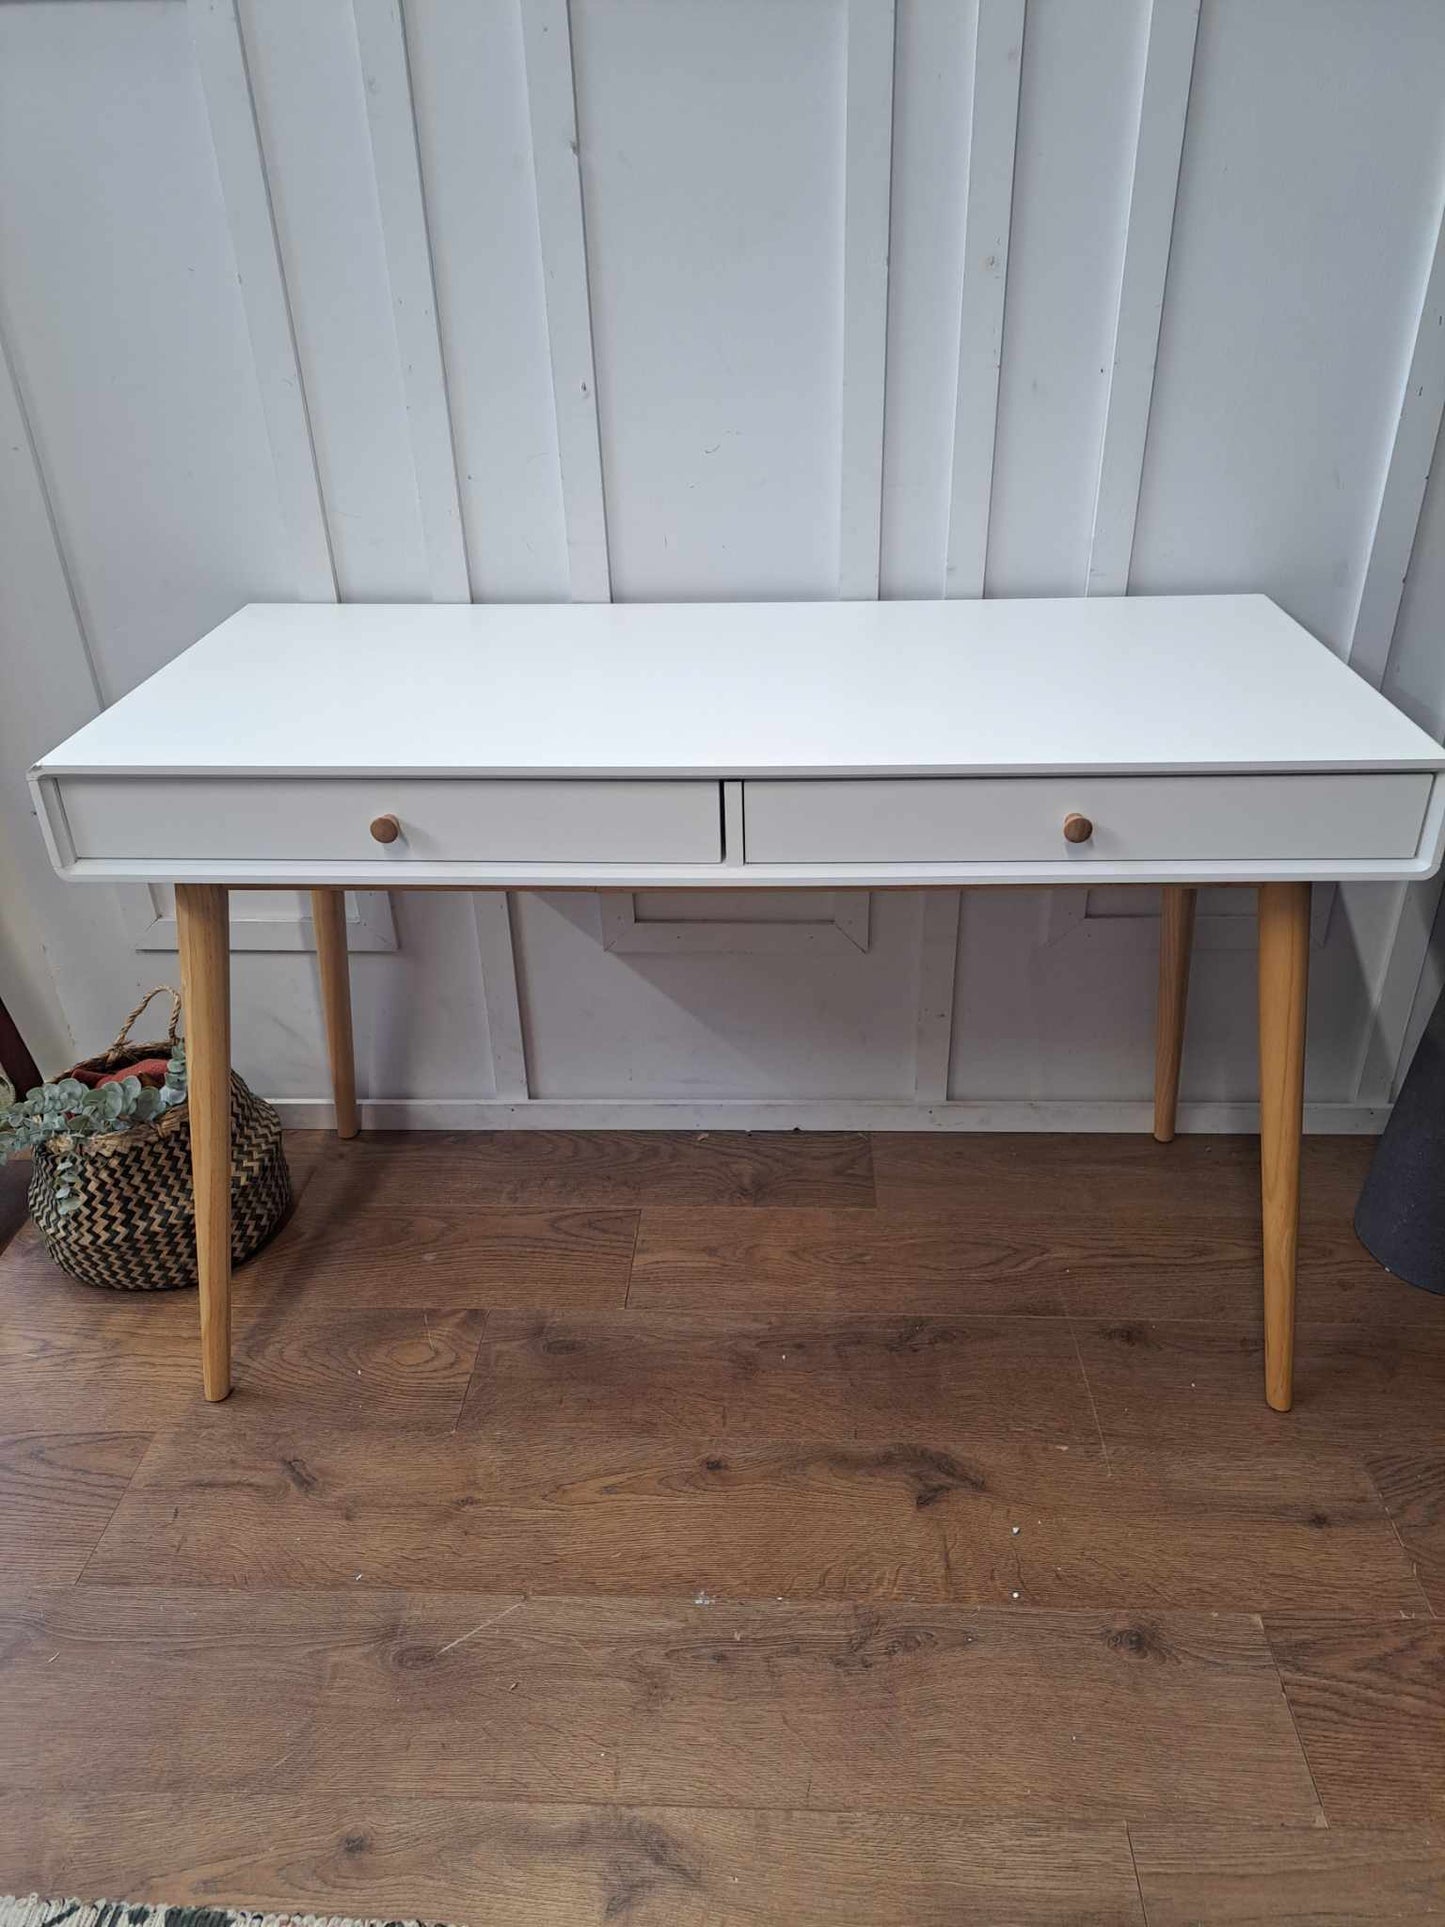 White and wood Large Desk